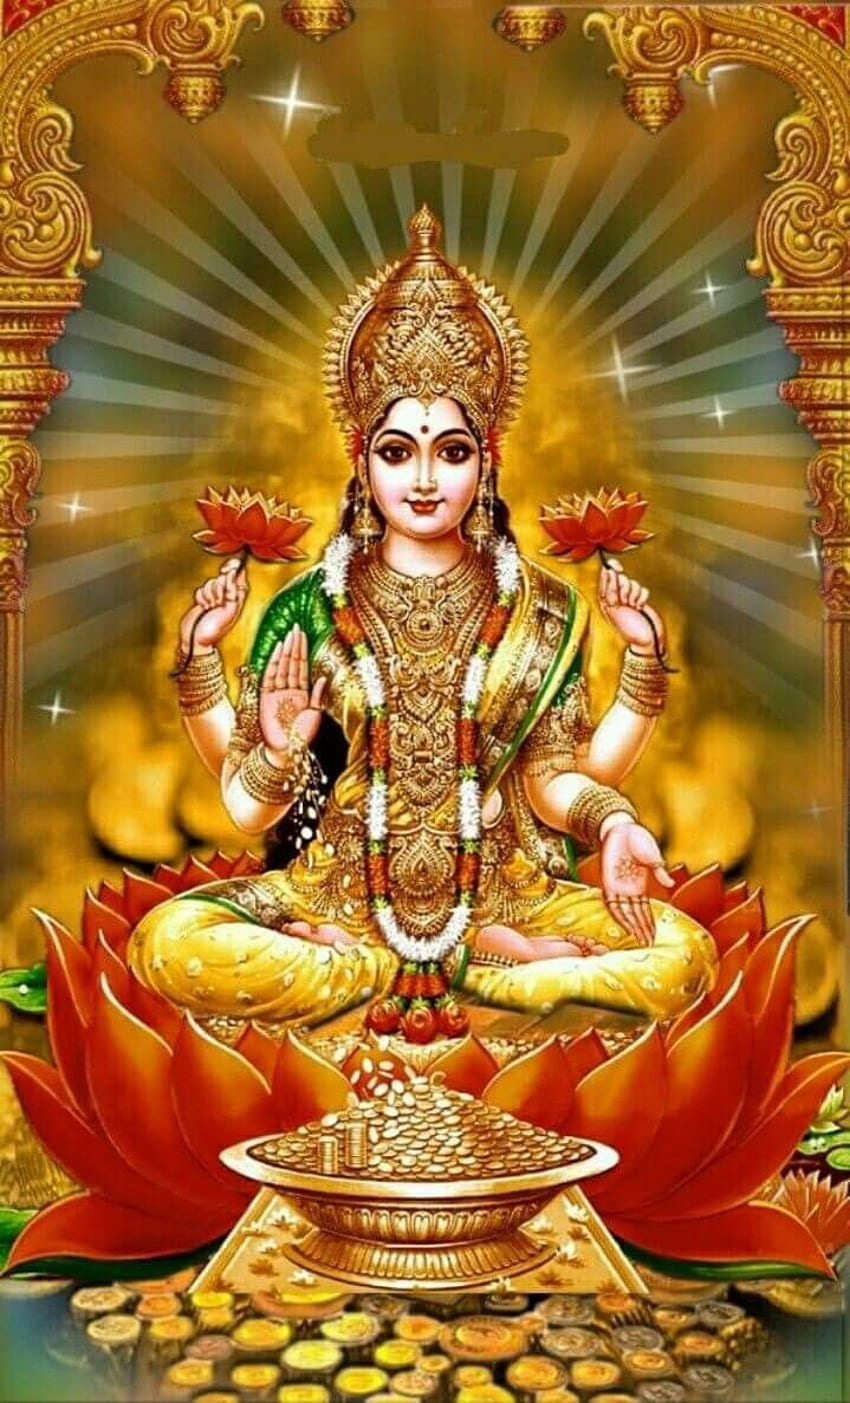 May Goddess lakshmi bless you with Health Peace Prosperity And for you're wellness as well take ❤ ranji. Kali goddess, Lakshmi , Durga goddess, Lord Lakshmi HD phone wallpaper